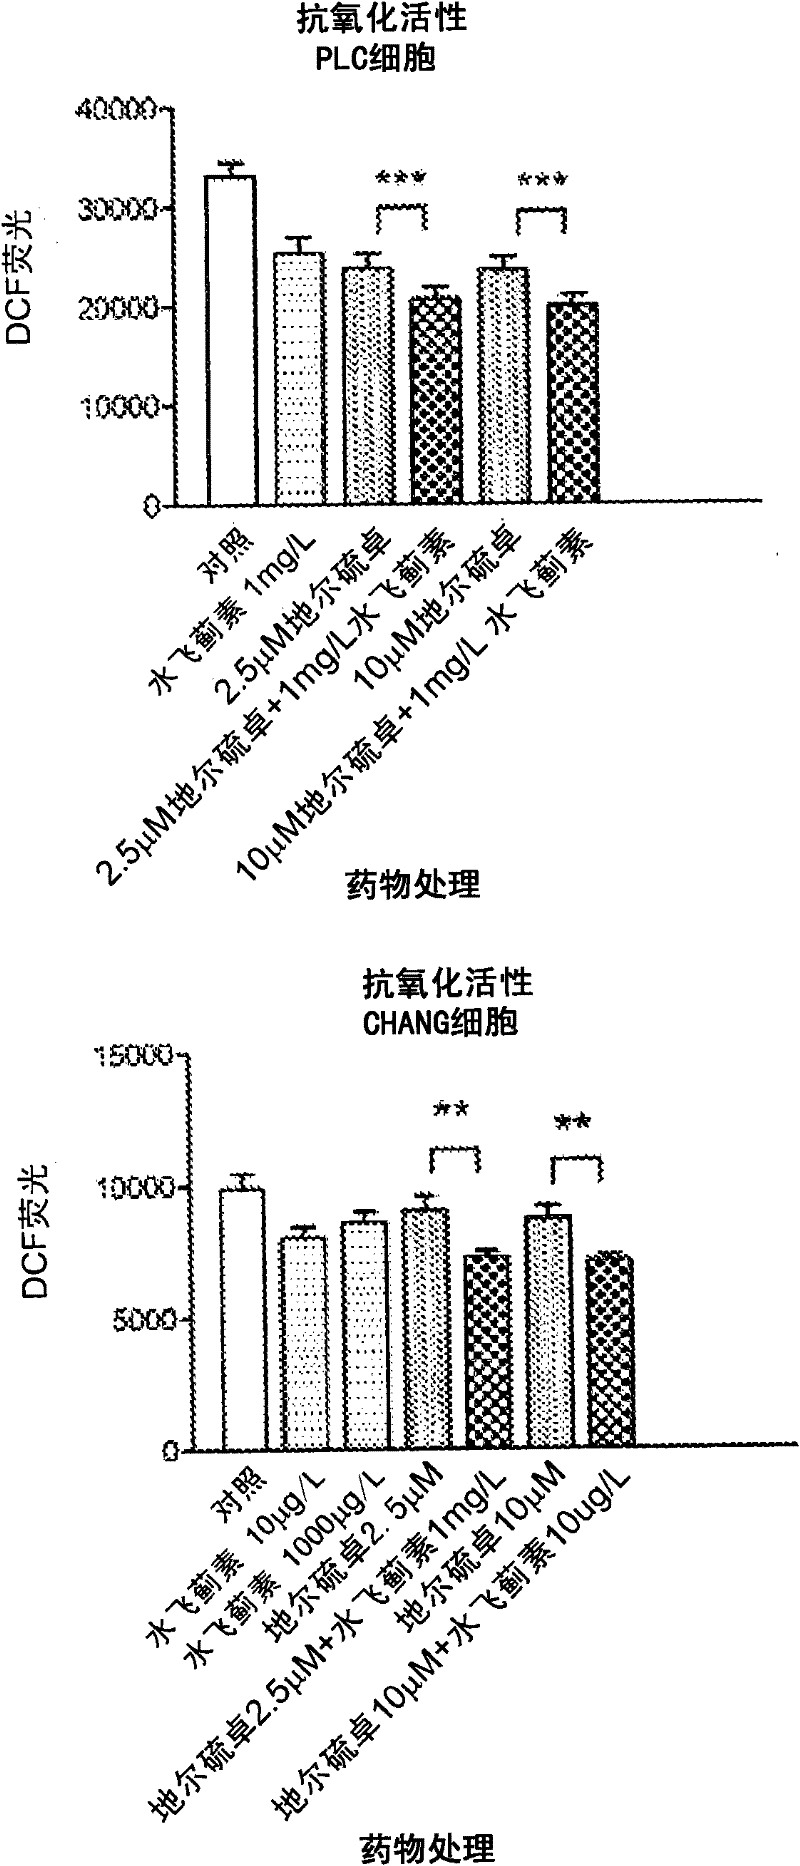 Method of treatment of liver disease